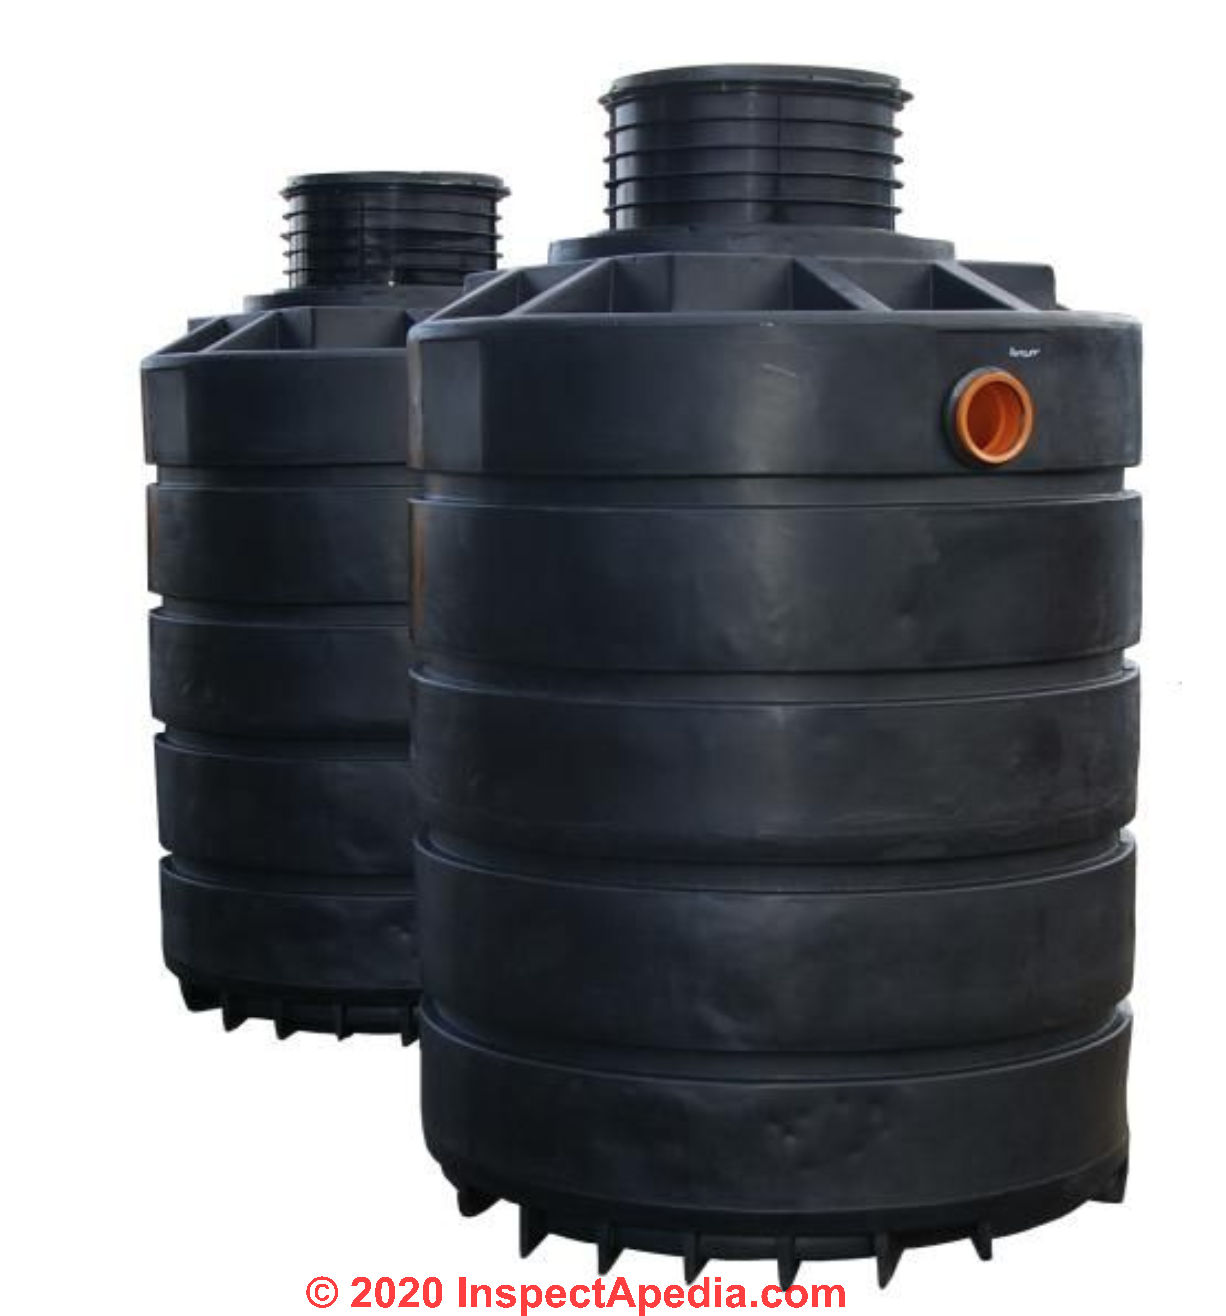 Septic Holding Tank, Tight Tank, Closed Vault Code, Specifications, Pumping